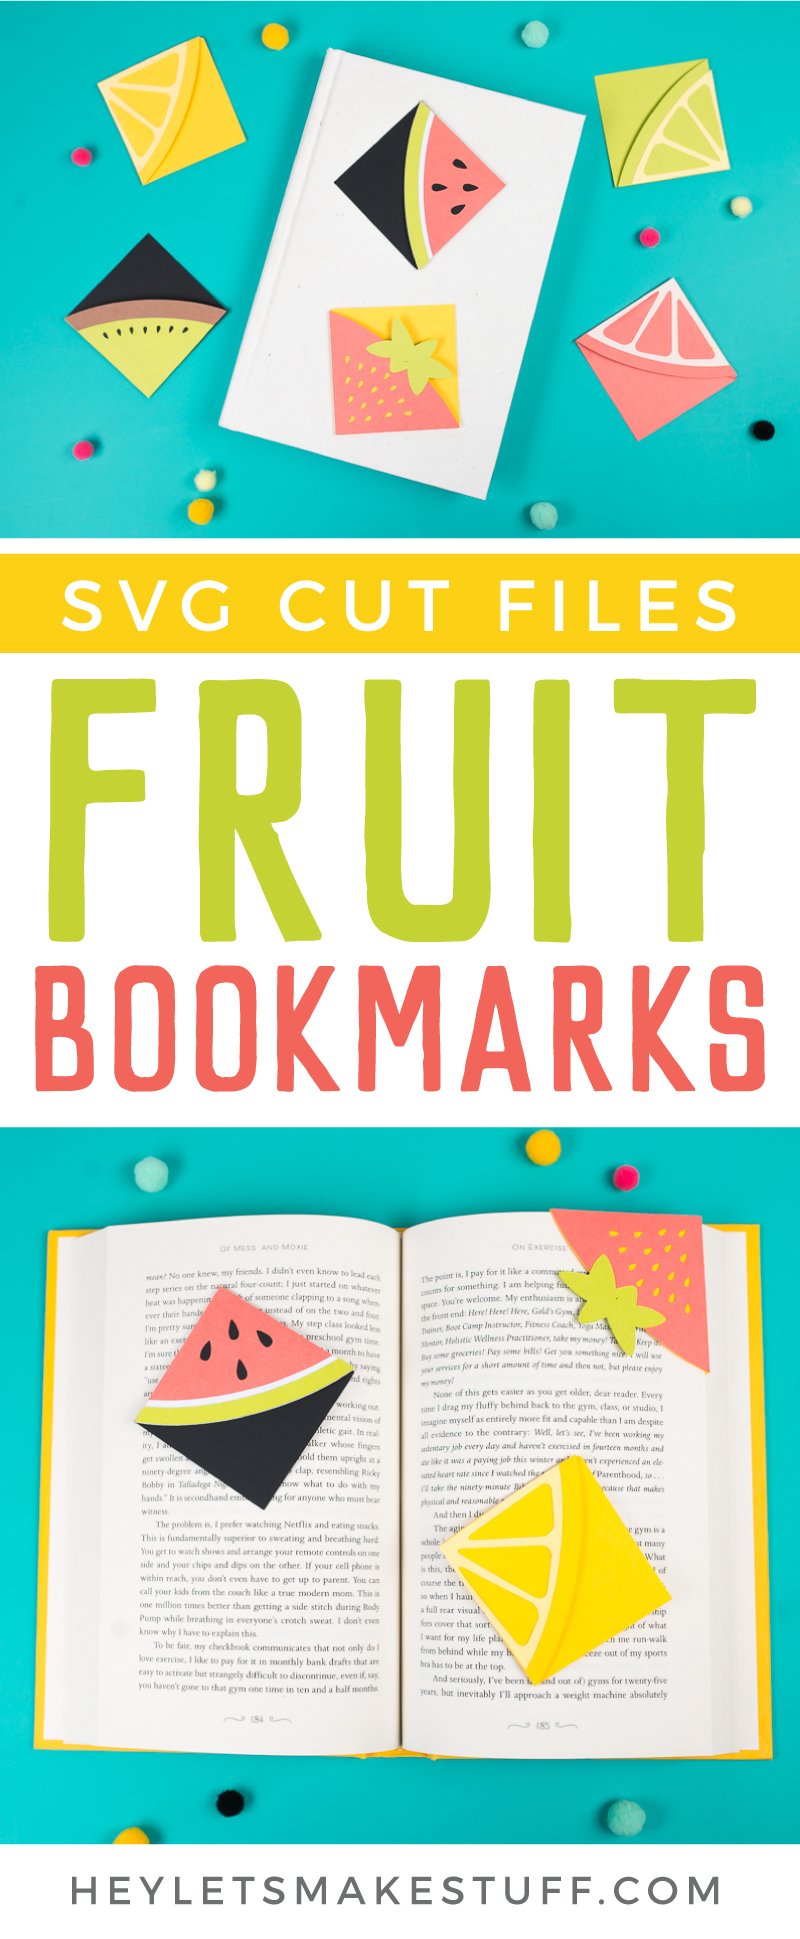 Two books with paper bookmarks made out of fruit designs and advertising for SVG cut files for fruit bookmarks by HEYLETSMAKESTUFF.COM